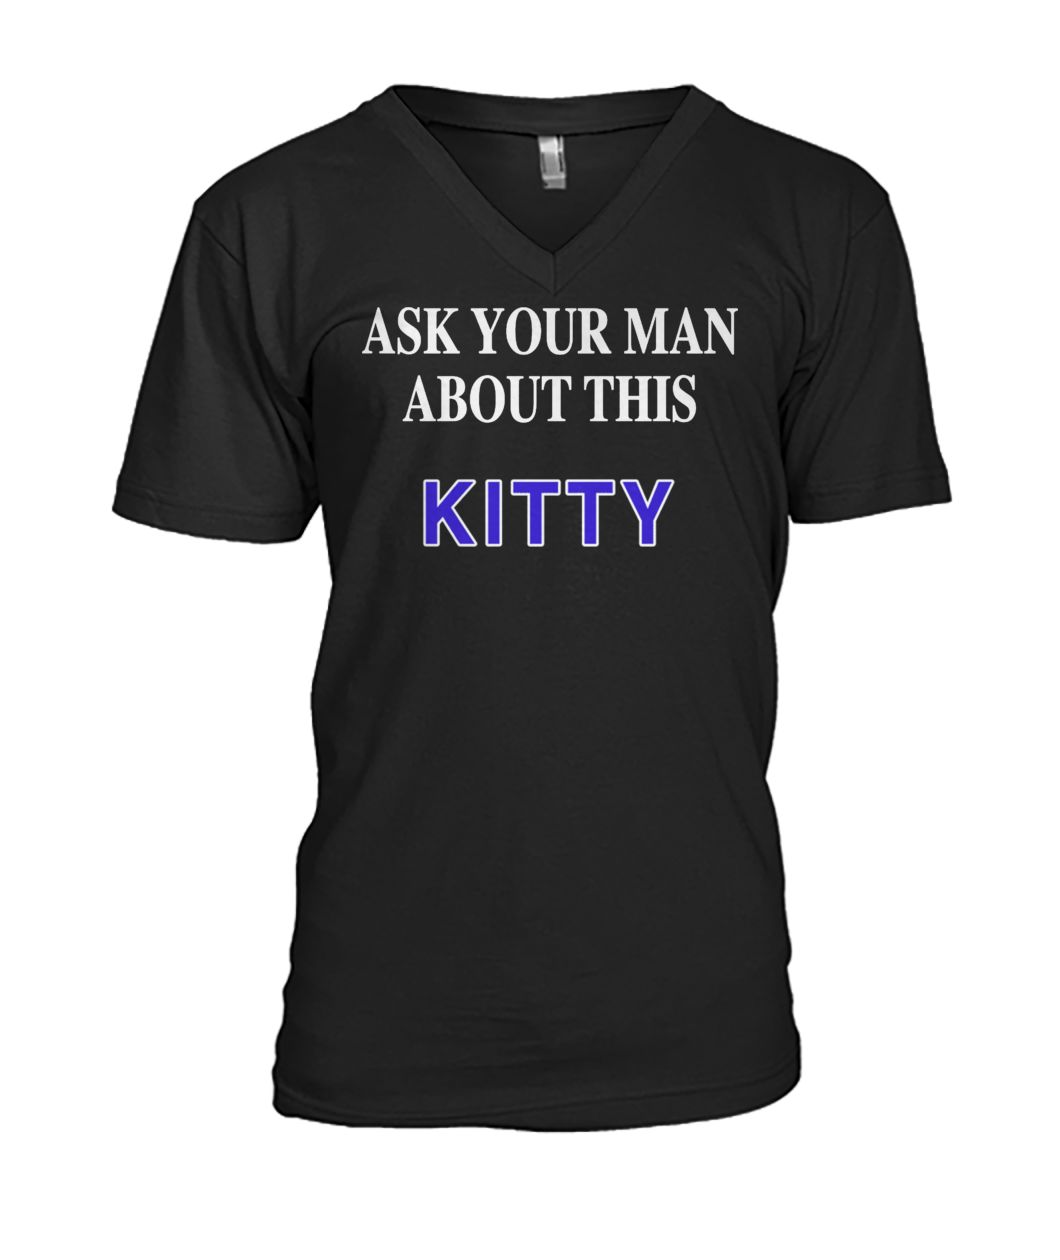 Ask your man about this kitty mens v-neck